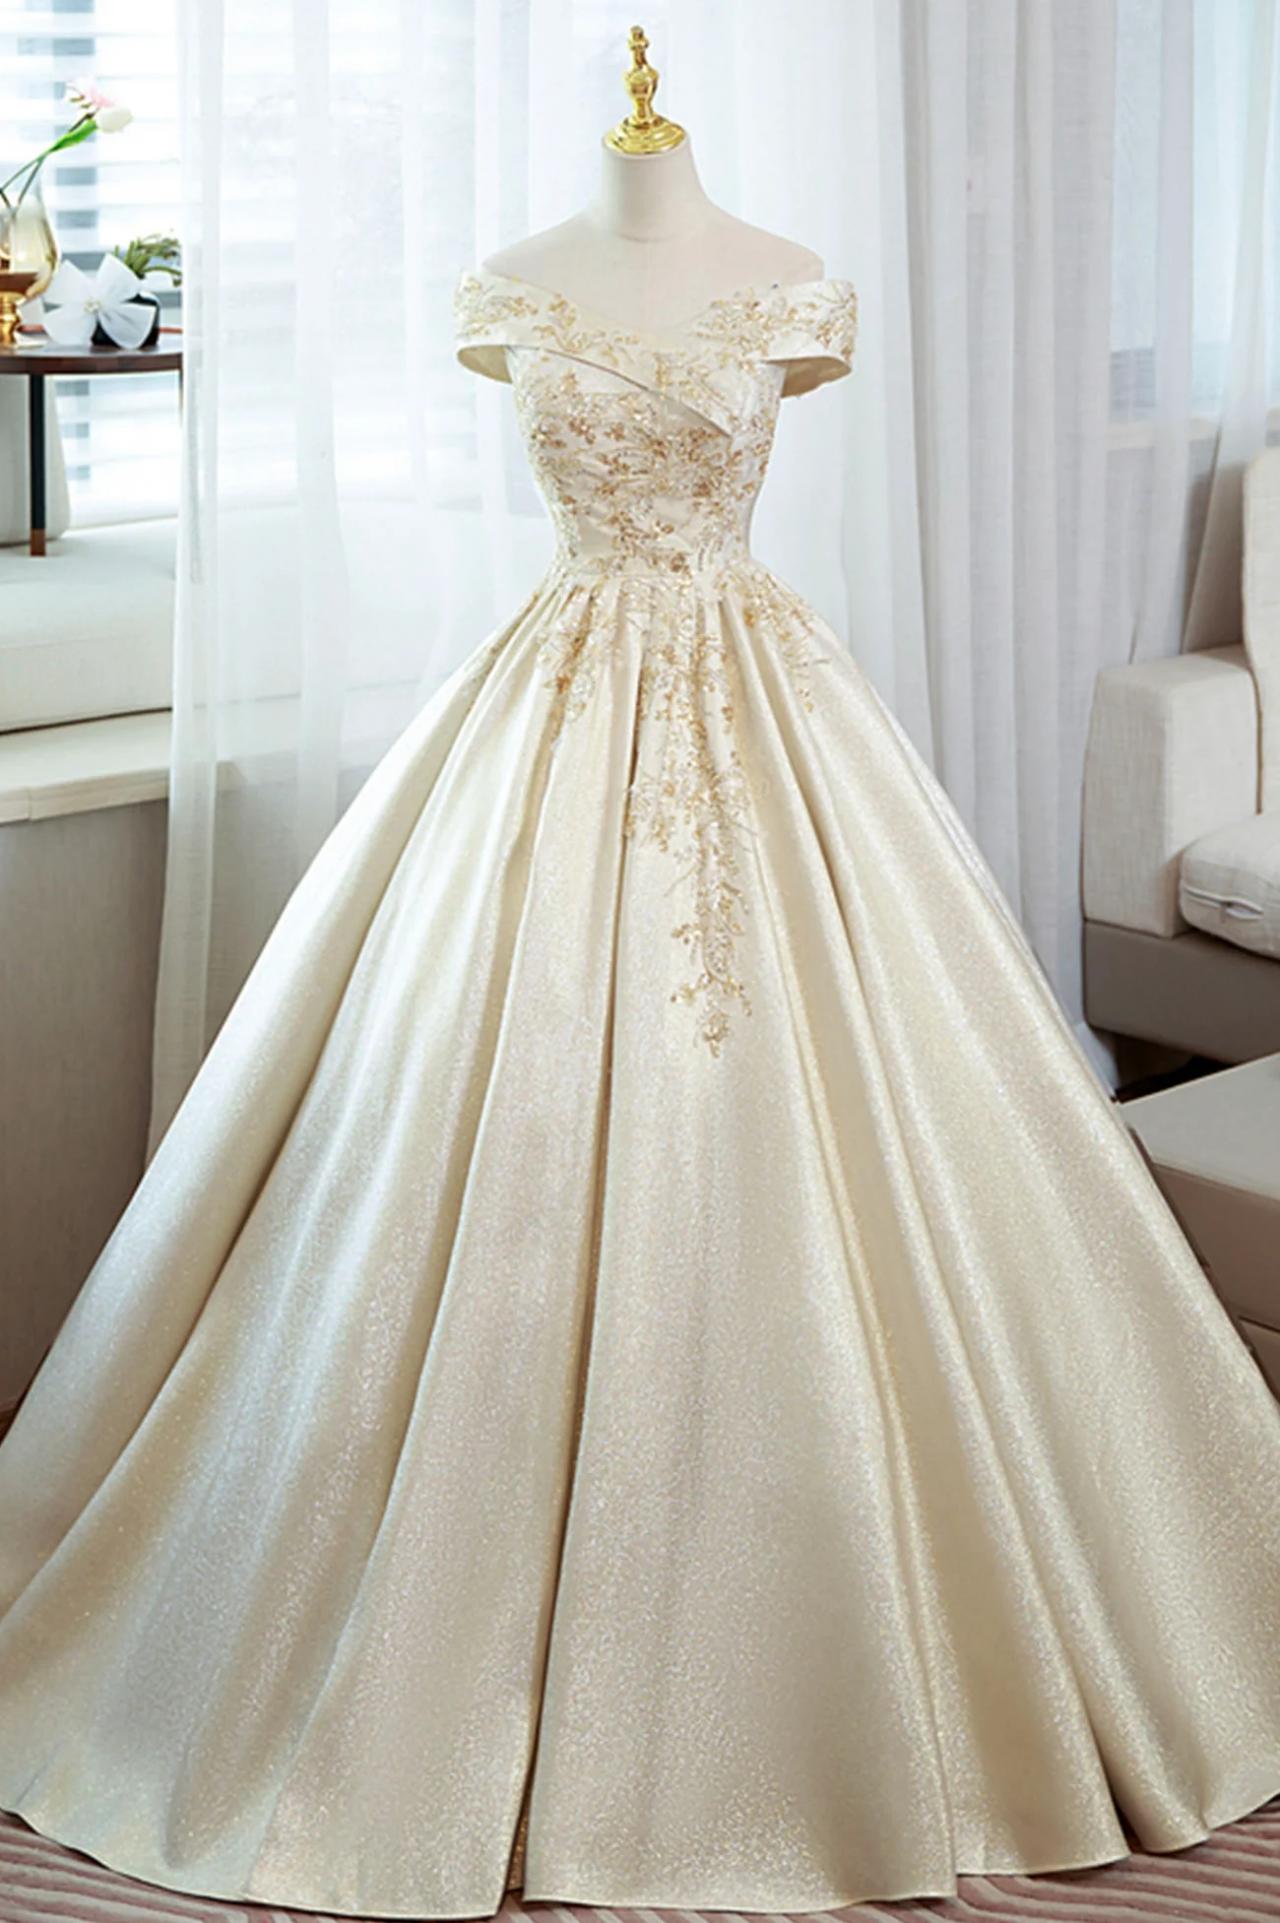 Elegant Champagne Satin Long Prom Dress With Beaded